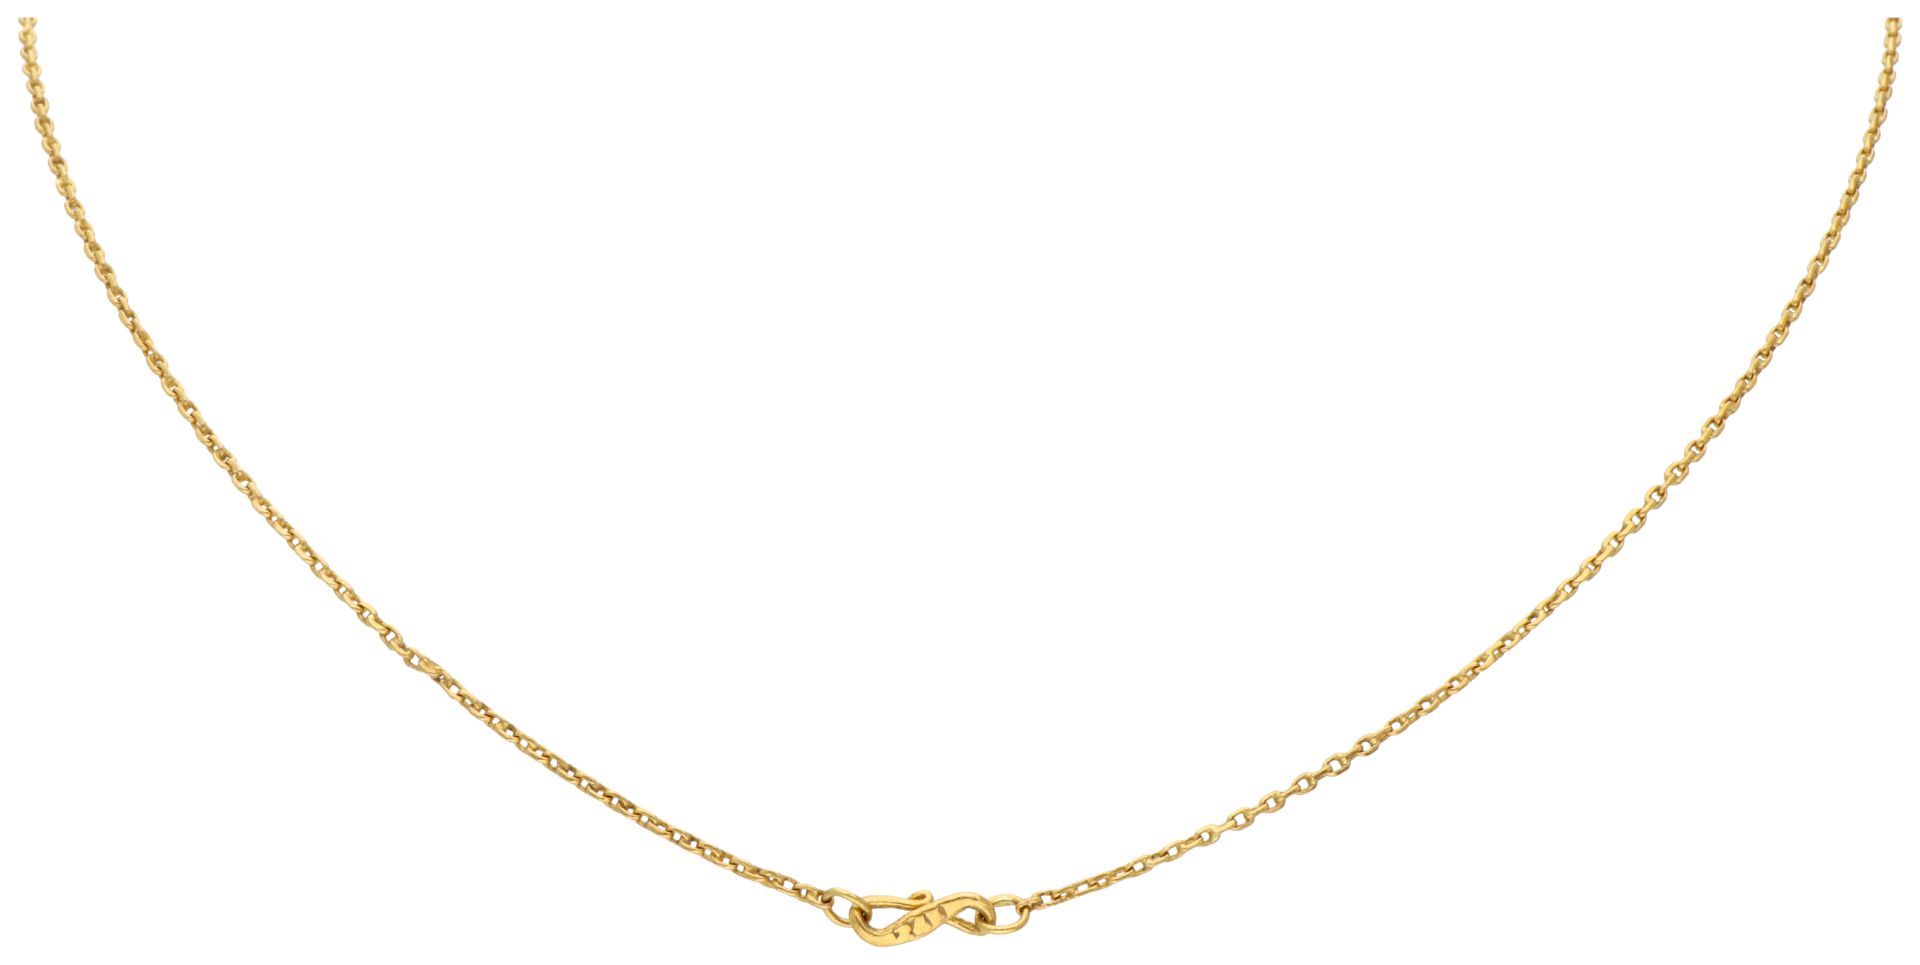 No reserve - 18K Yellow gold necklace with pendant set with approx. 0.55 ct. diamond. - Image 3 of 3